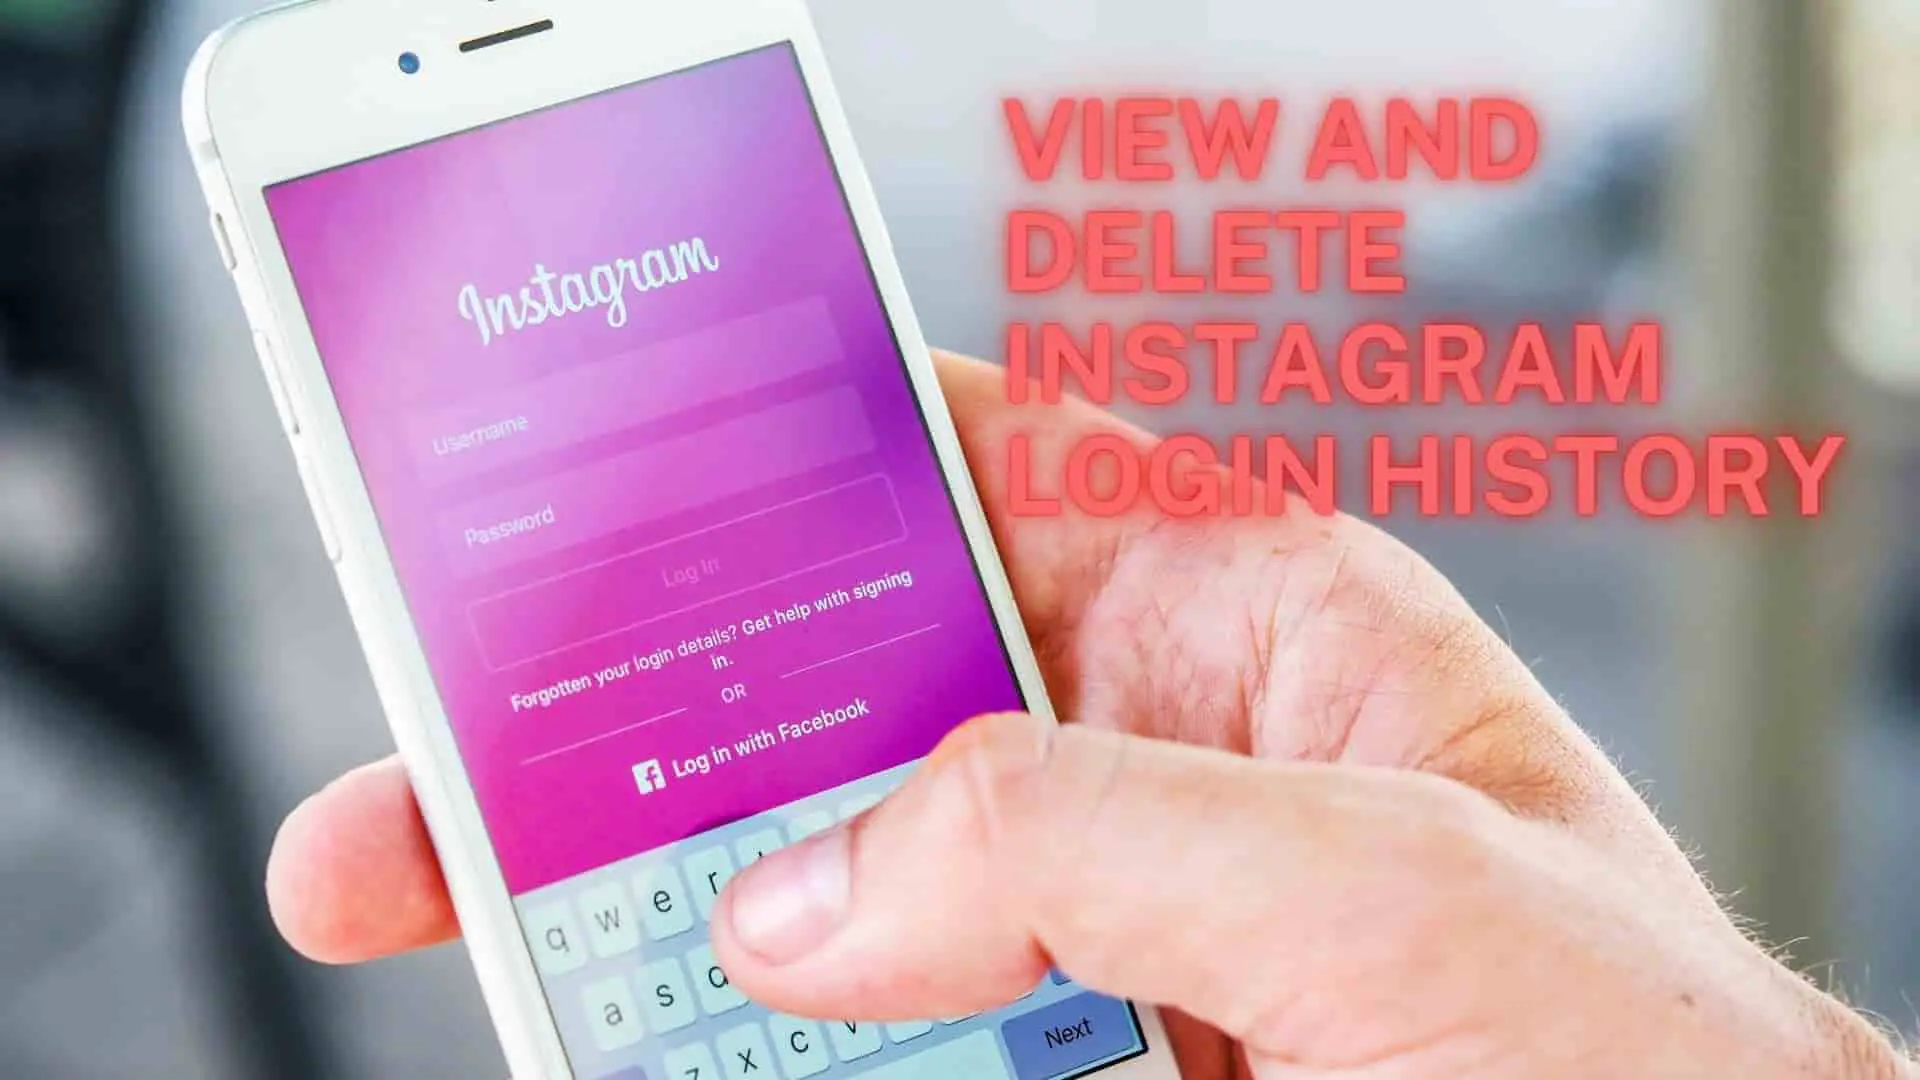 view-and-delete-instagram-login-history